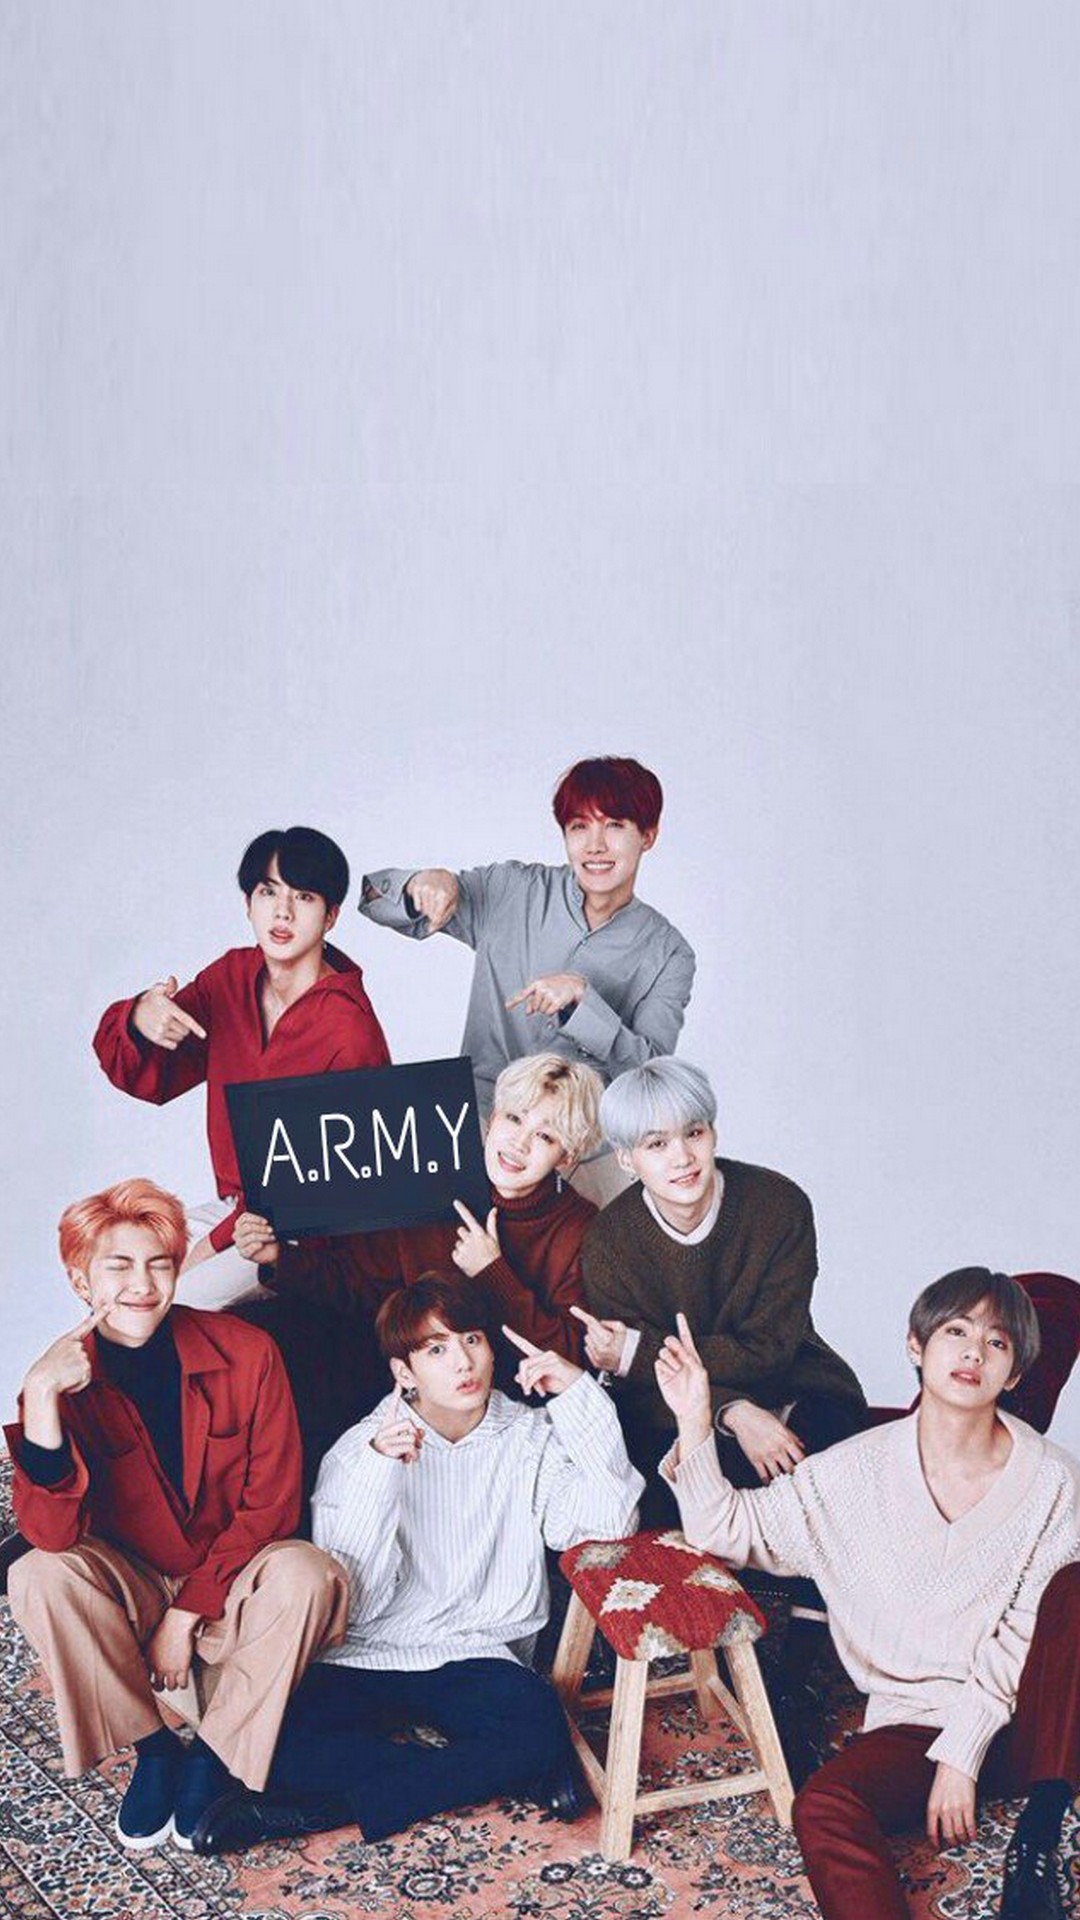 BTS Wallpaper iPhone with high-resolution 1080x1920 pixel. You can use this wallpaper for your iPhone 5, 6, 7, 8, X, XS, XR backgrounds, Mobile Screensaver, or iPad Lock Screen